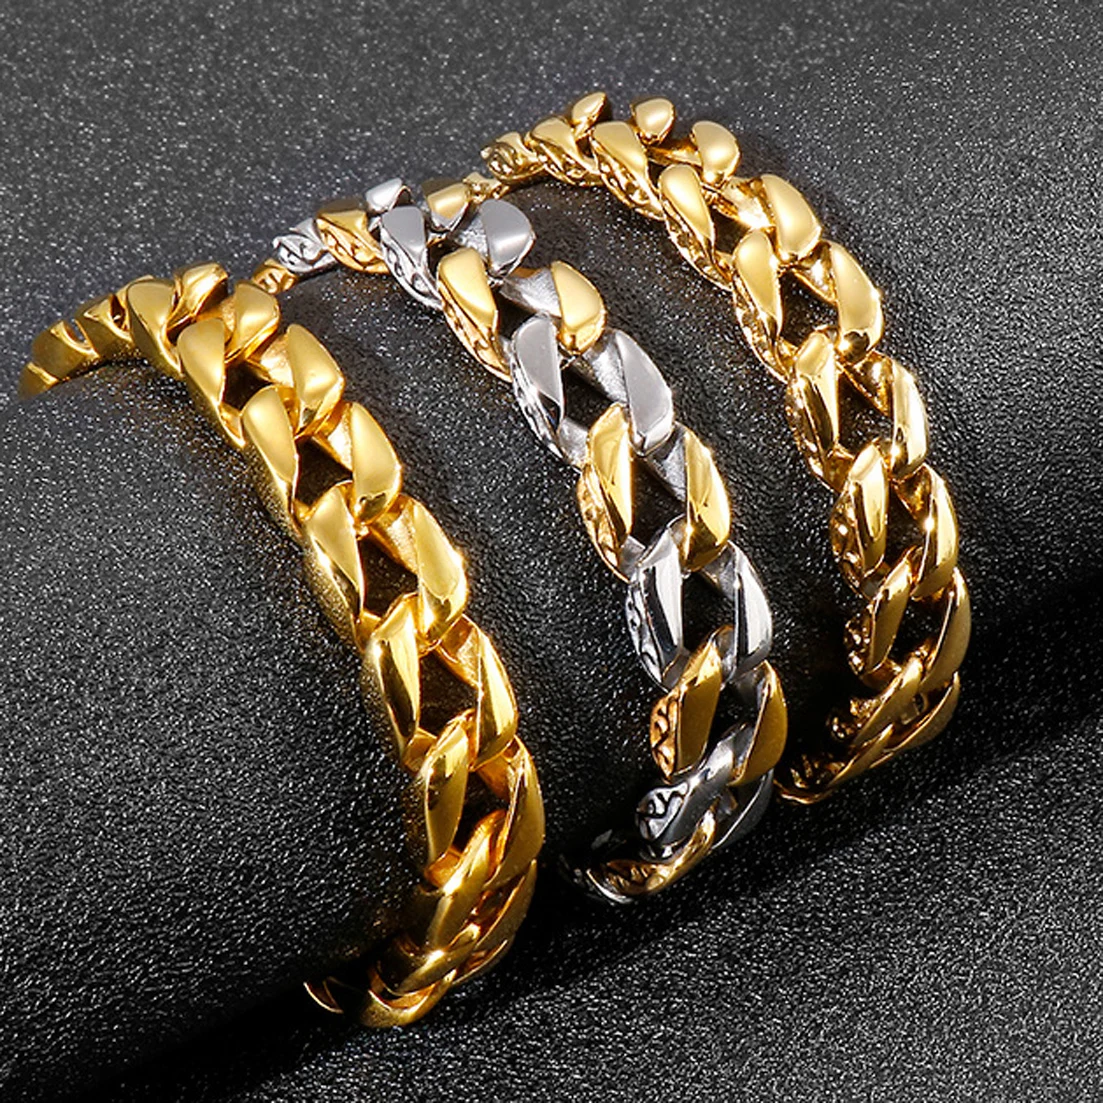 

12mm Wide Men Women Gold/Silver Color 316L Stainless Steel Curb Cuban Link Chain Bracelet Bangles Cool Jewelry 22cm